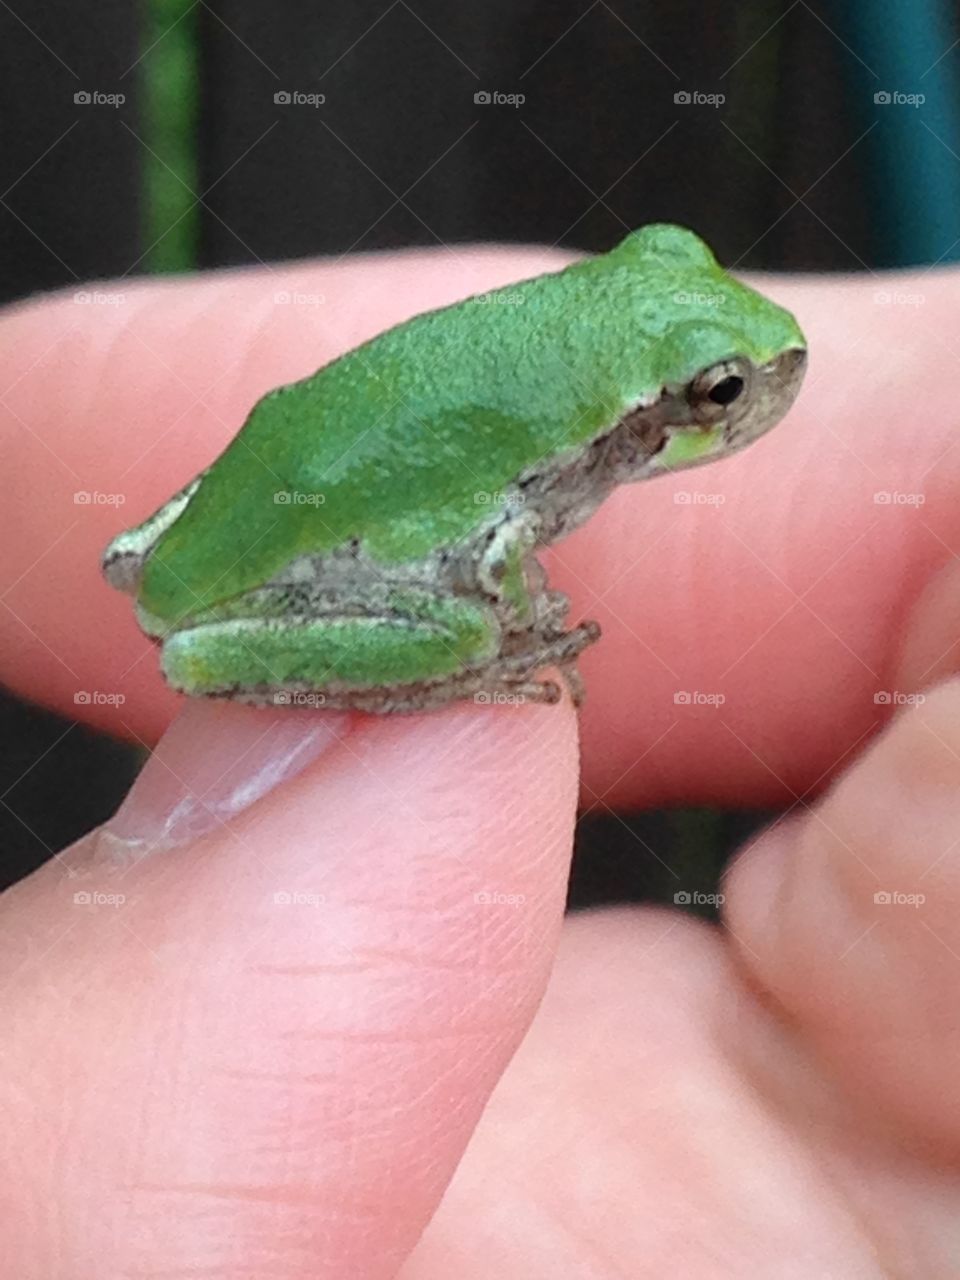 Tree frog. A tiny tree frog, taking a rest!